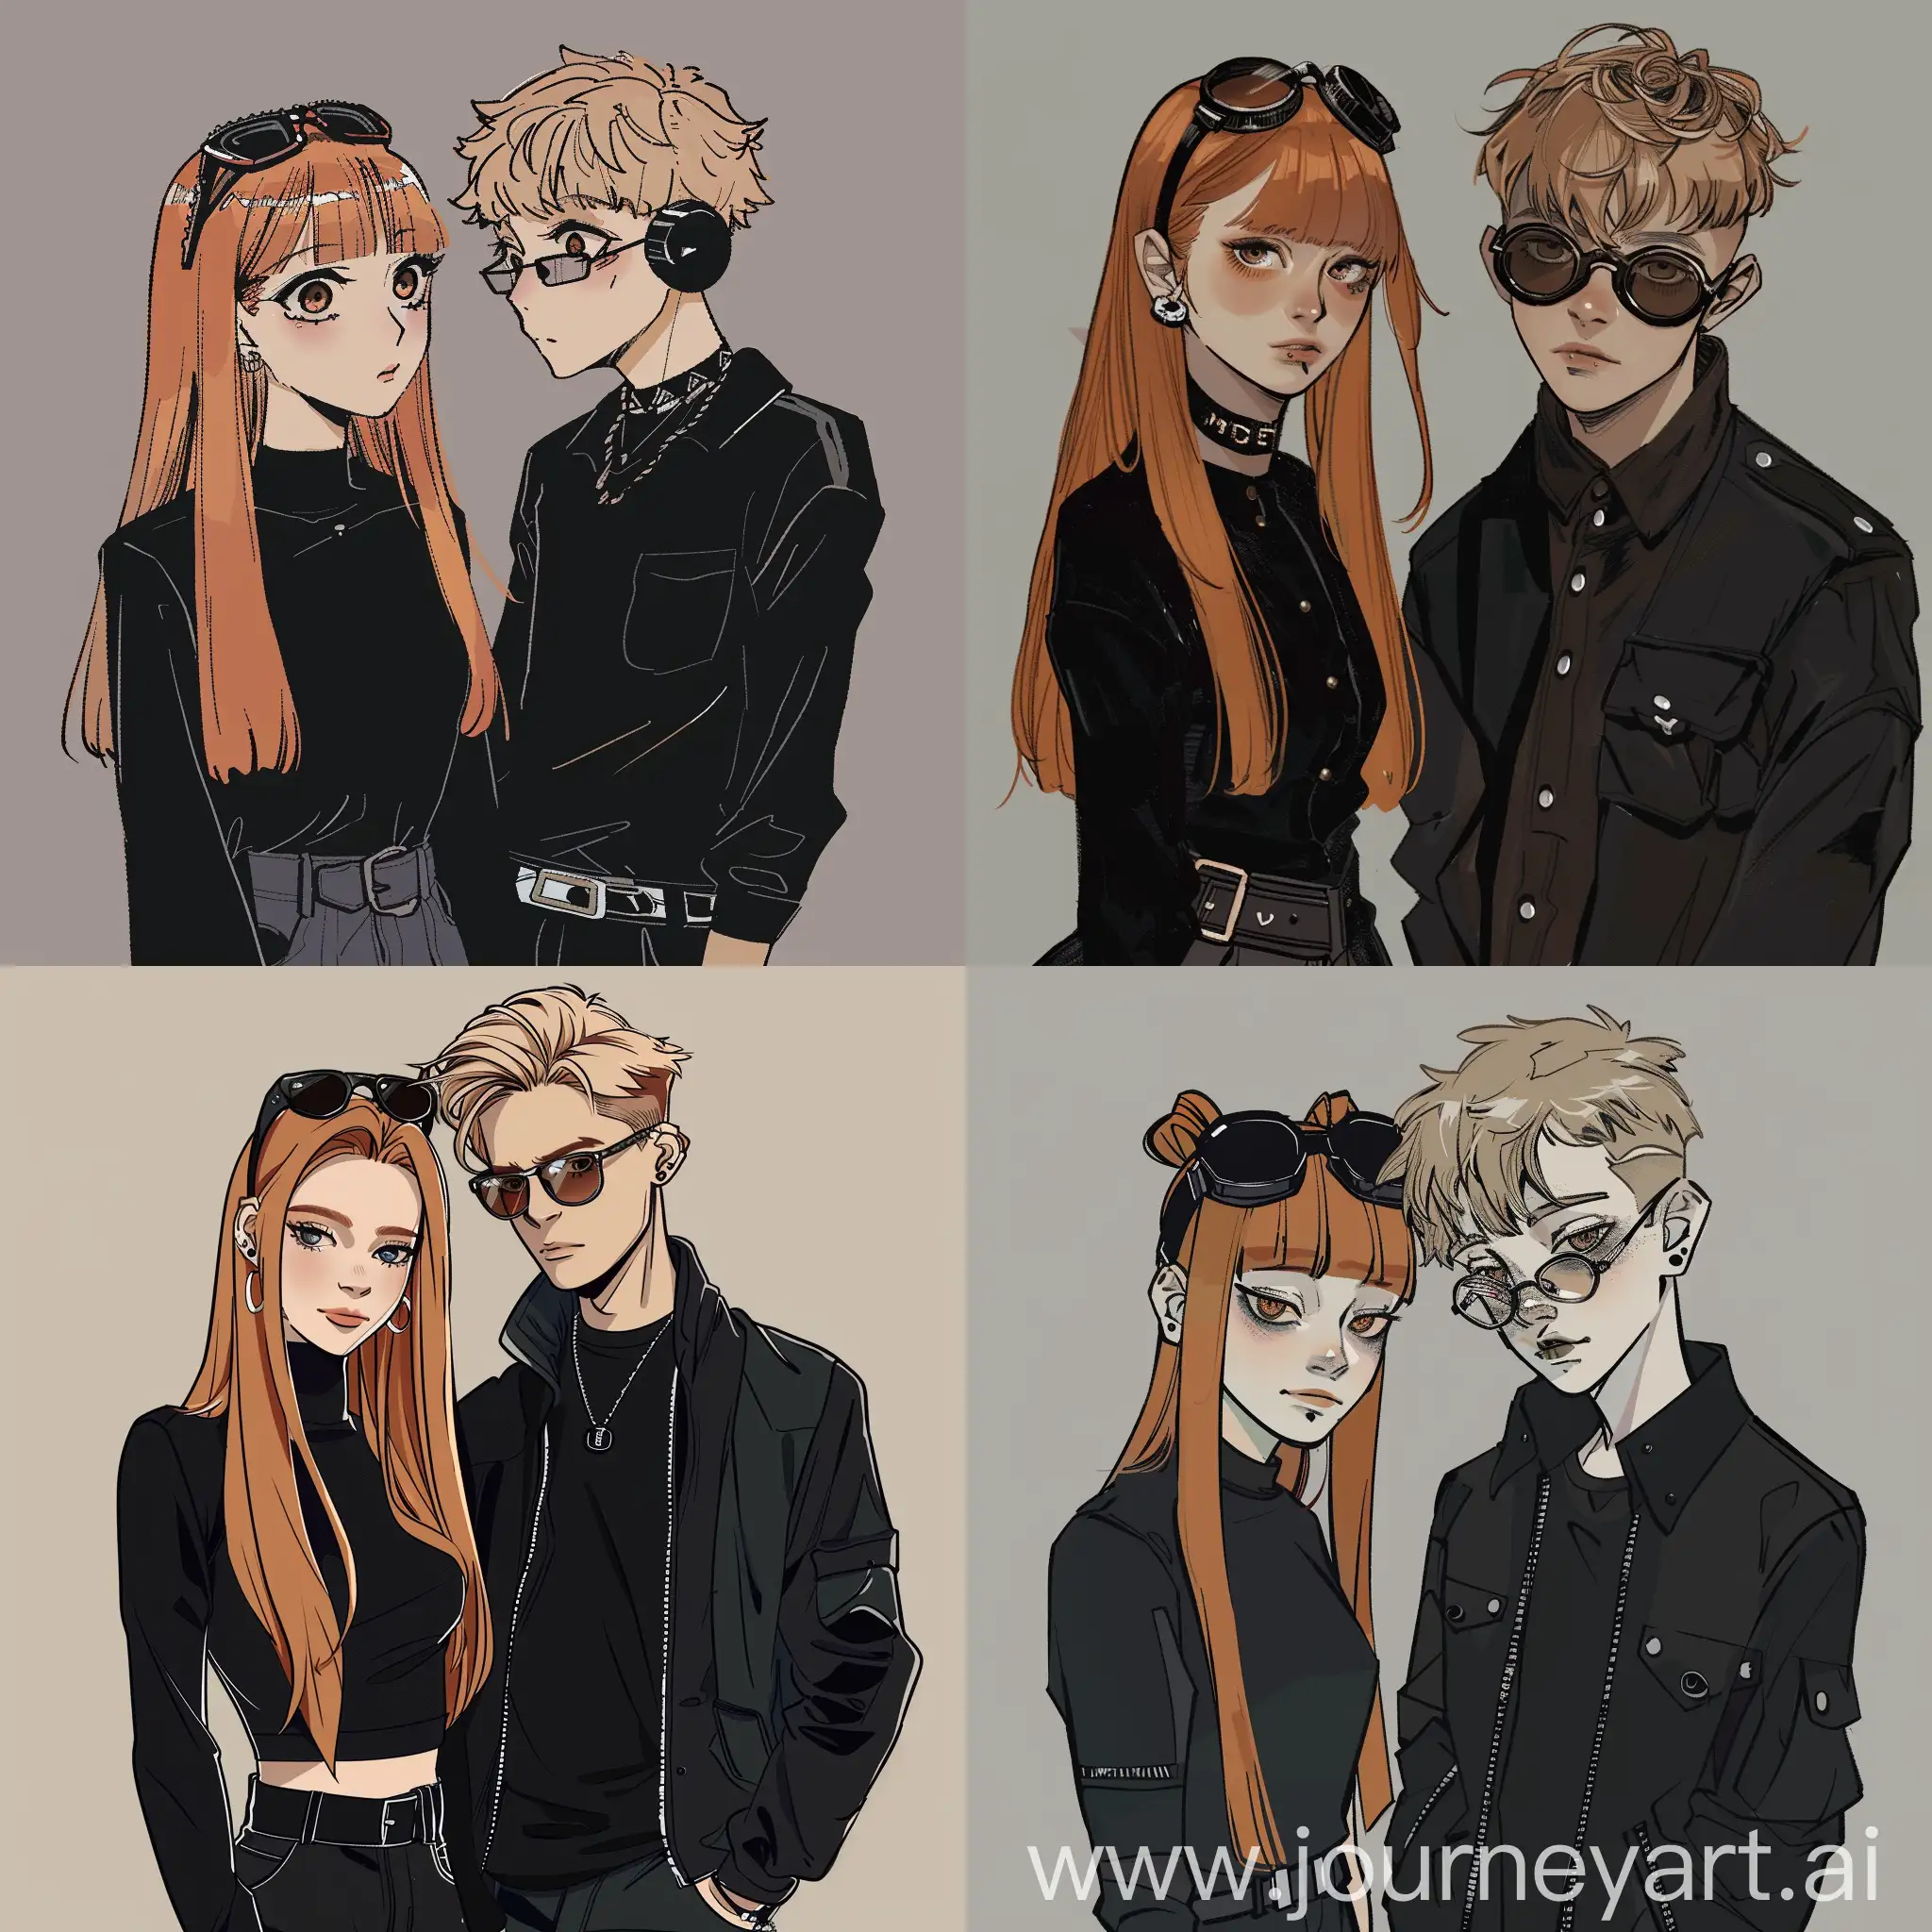 Teenage-Duo-Animated-Drawing-of-a-Girl-with-Ginger-Hair-and-a-Boy-with-Blonde-Hair-in-Dark-Theme